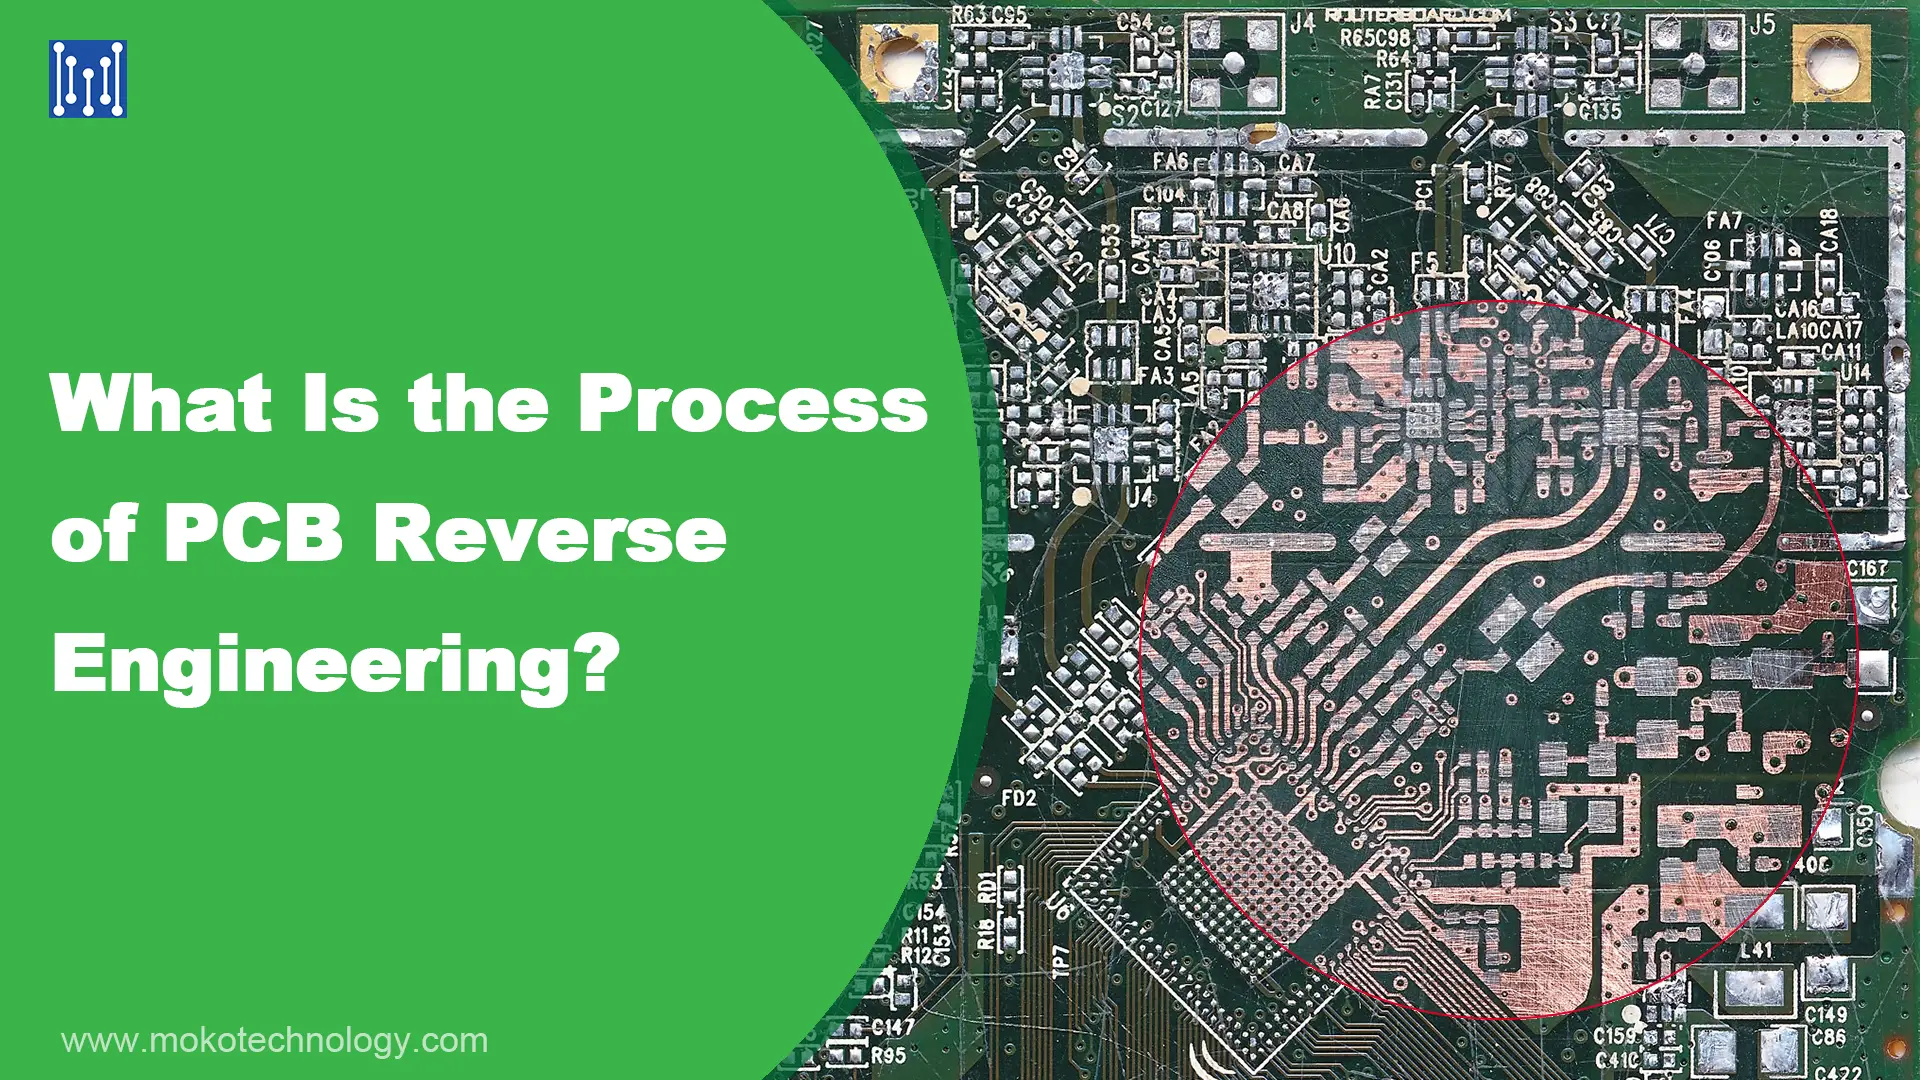 What Is the Process of PCB Reverse Engineering?